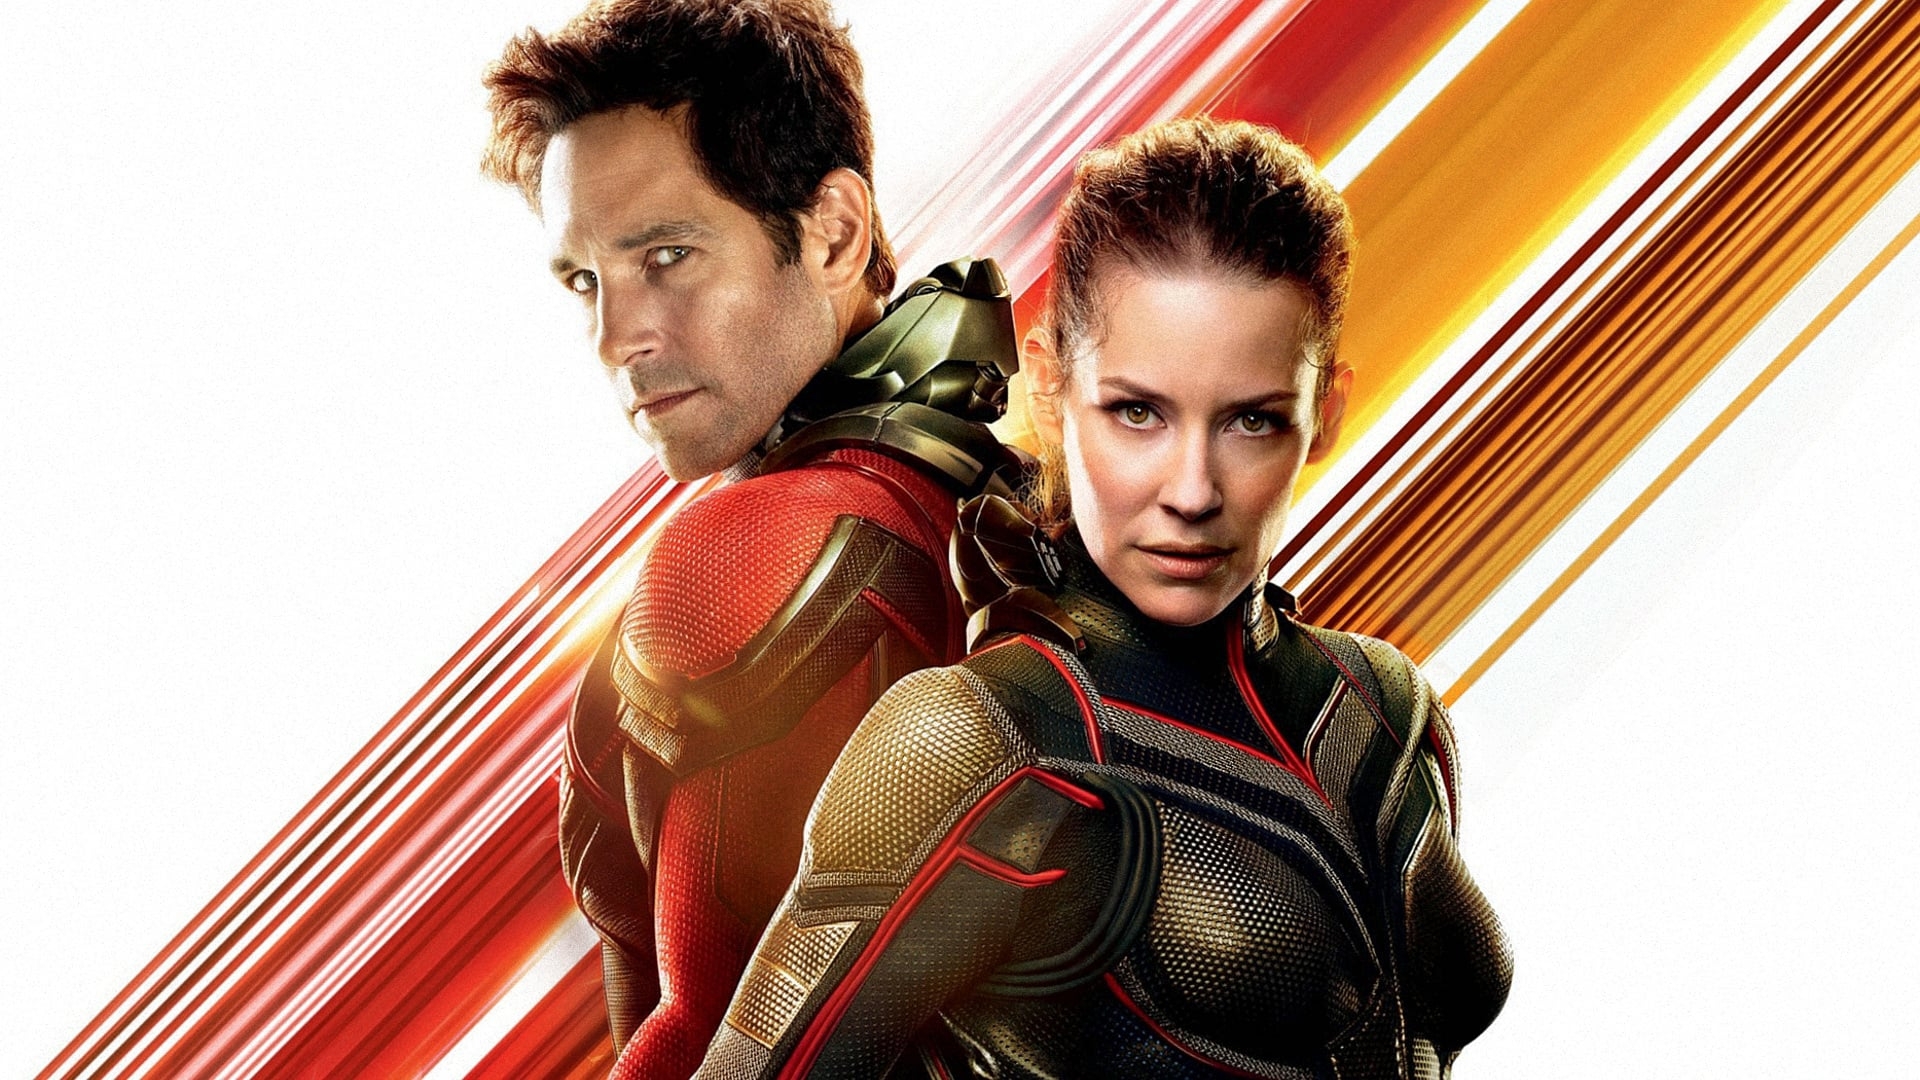 Ant-Man and the Wasp (Ant-Man and the Wasp)